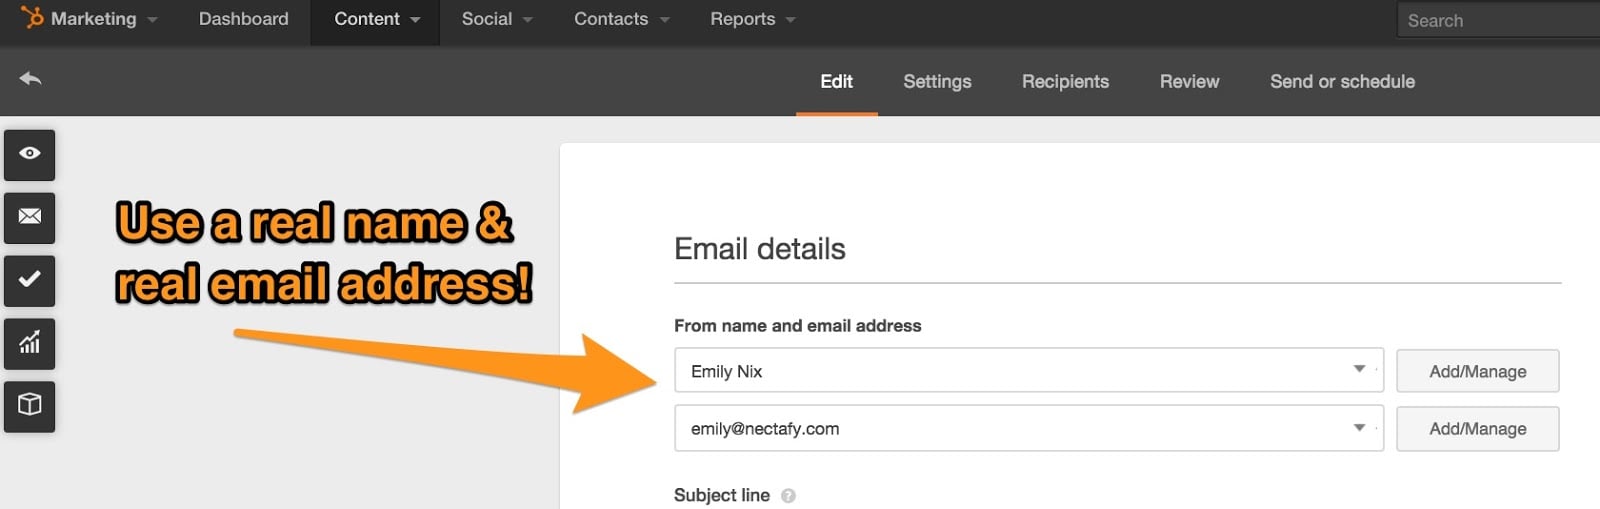 9 Best Practices For A Successful (& Personal) Email Nurture Campaign